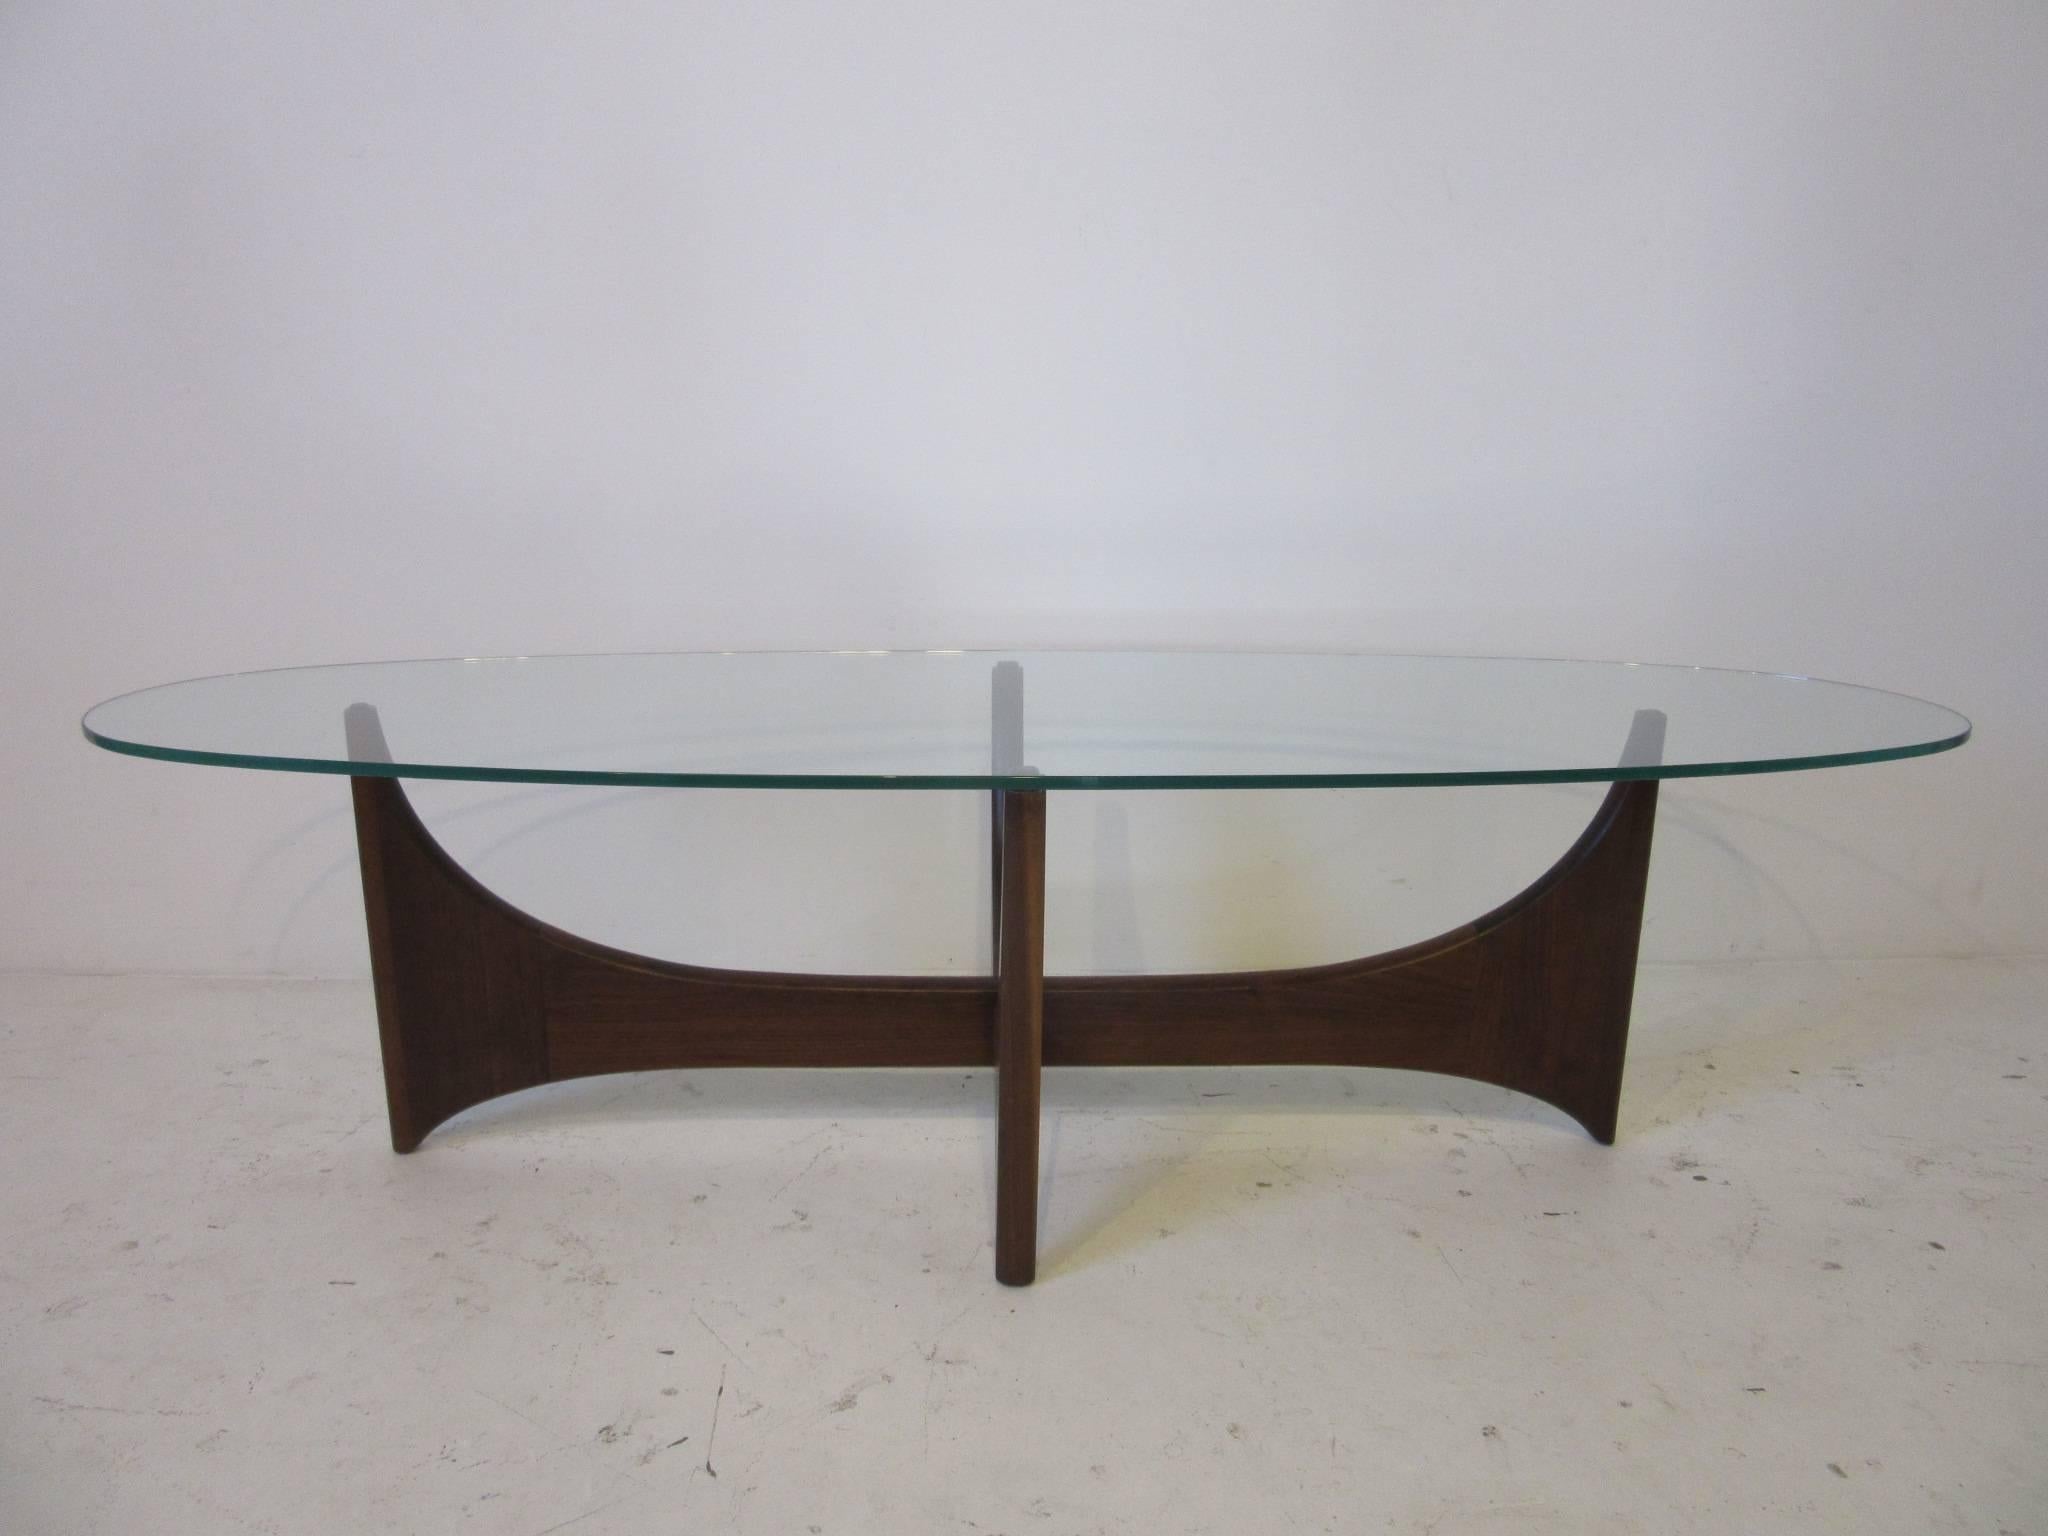 A oval glass topped sculptural dark solid walnut based Adrian Pearsall coffee table manufactured by Craft Associates, a simple and well crafted design.